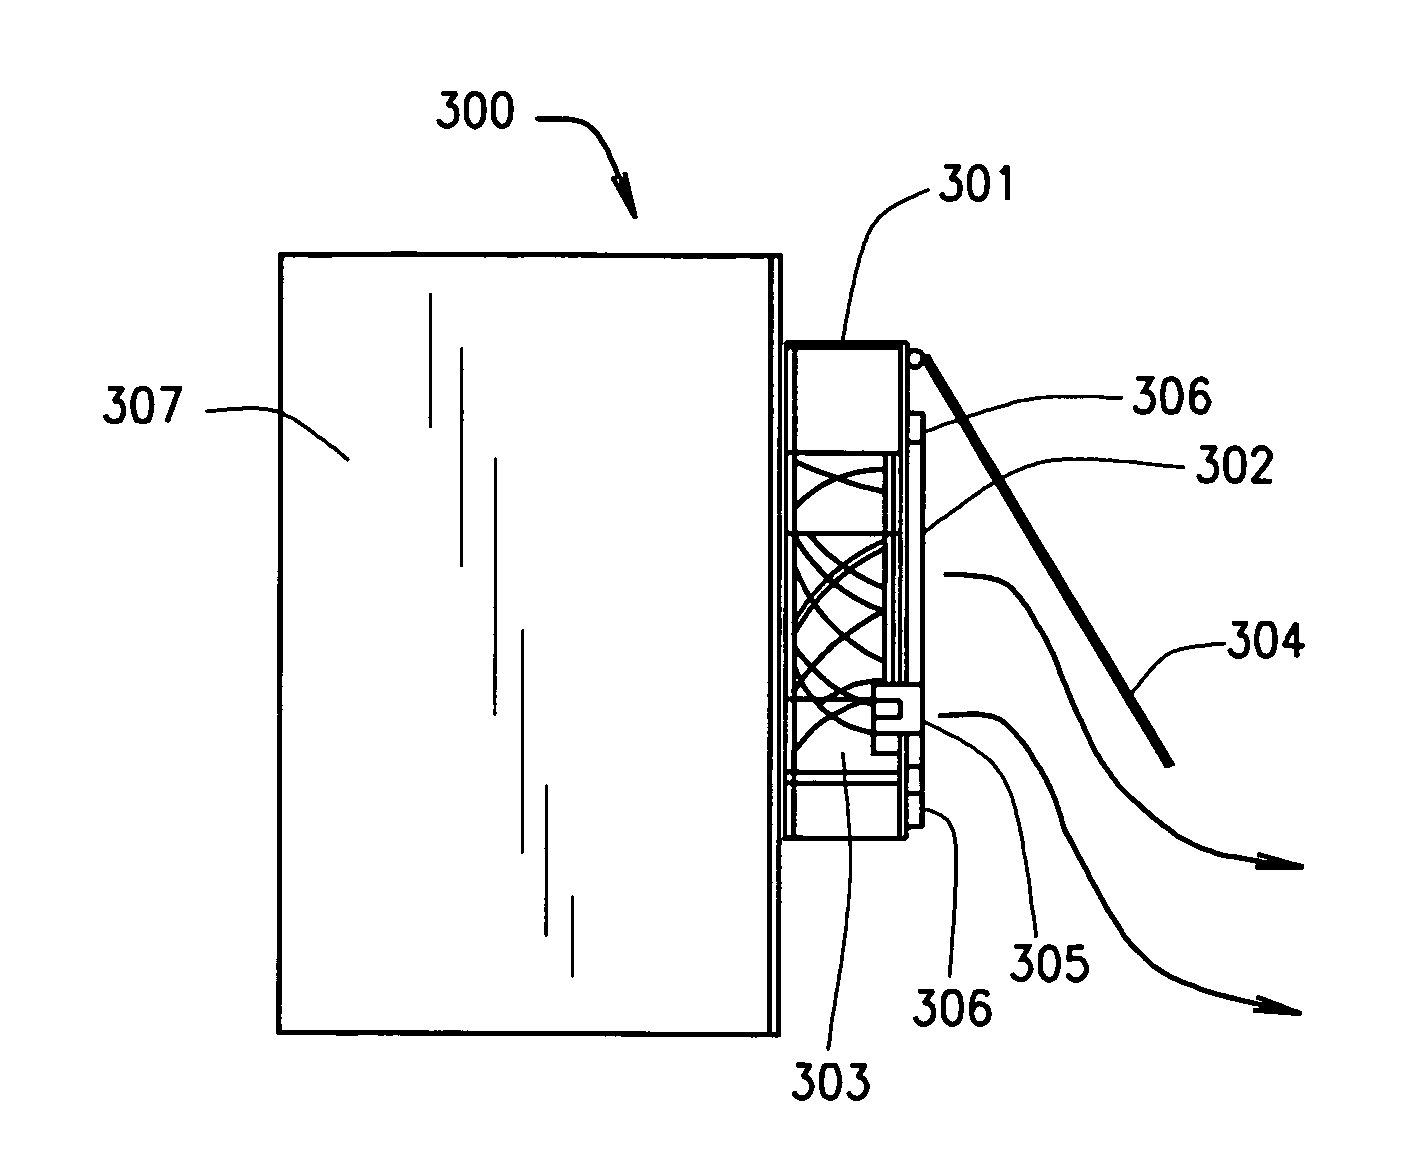 Electromagnet-assisted ventilation cover for an electronic equipment enclosure